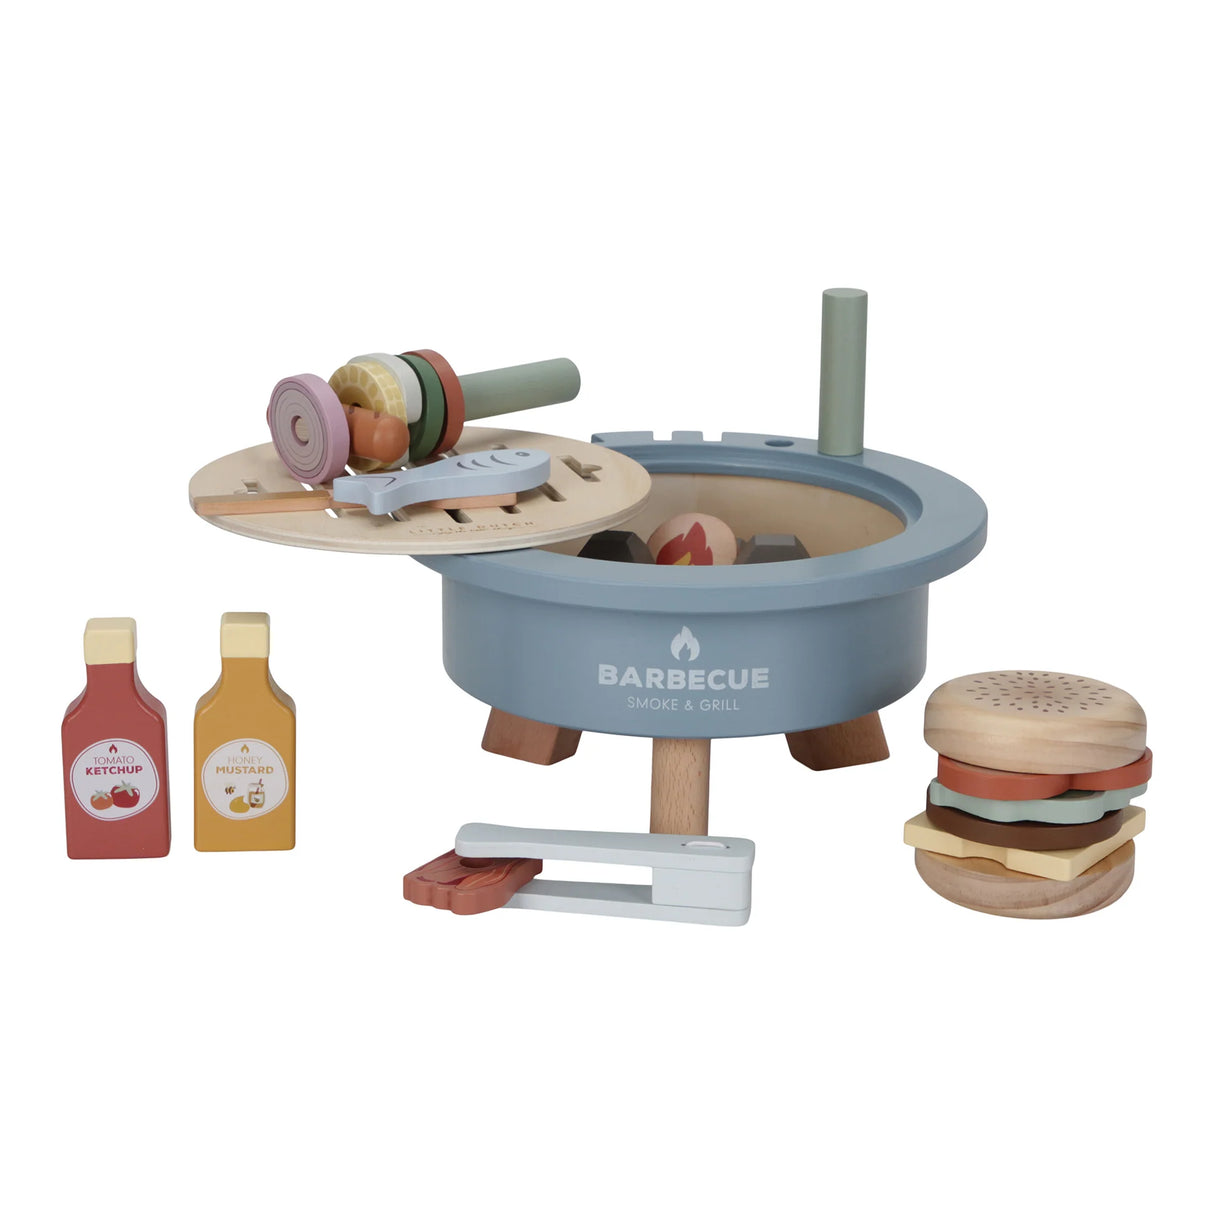 BBQ Barbecue Toy Set